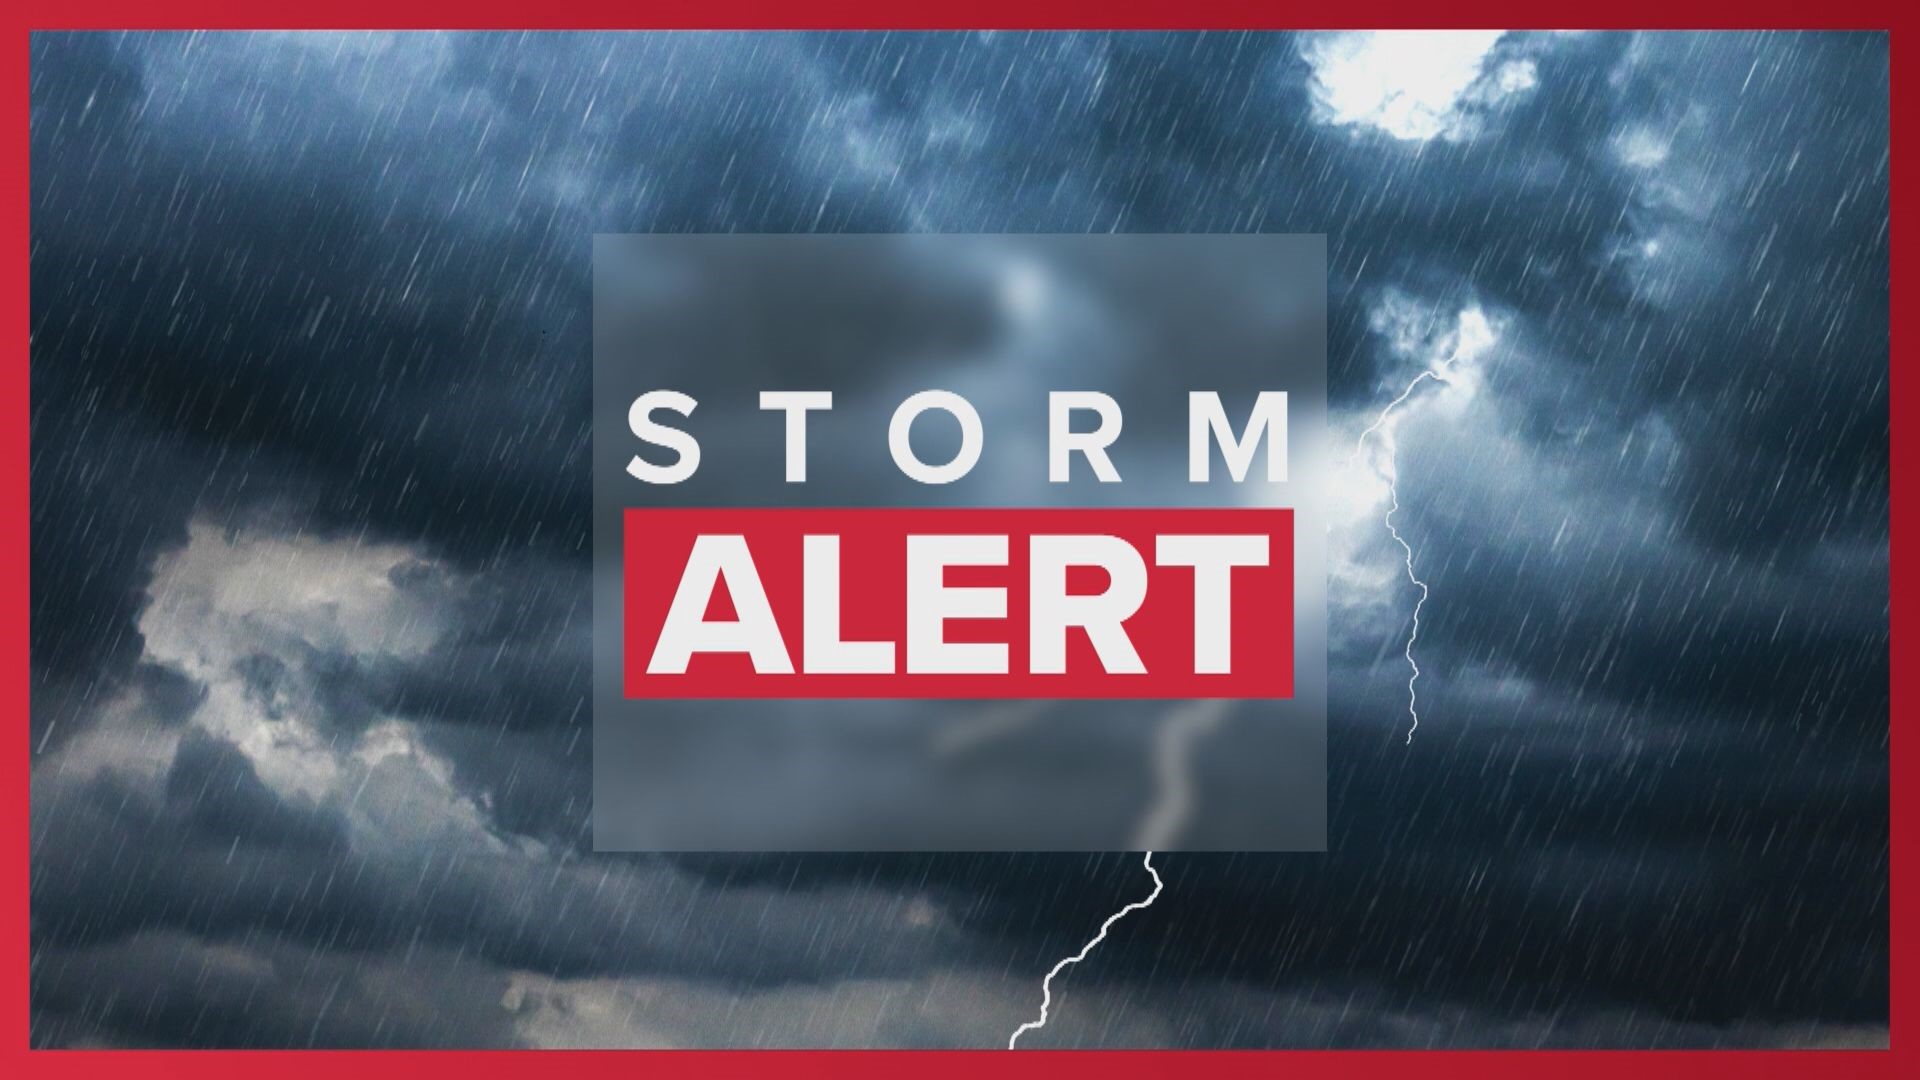 A severe thunderstorm warning was issued for parts of Gasconade, Lincoln and Warren counties. The threat of severe weather approaches the St. Louis area.